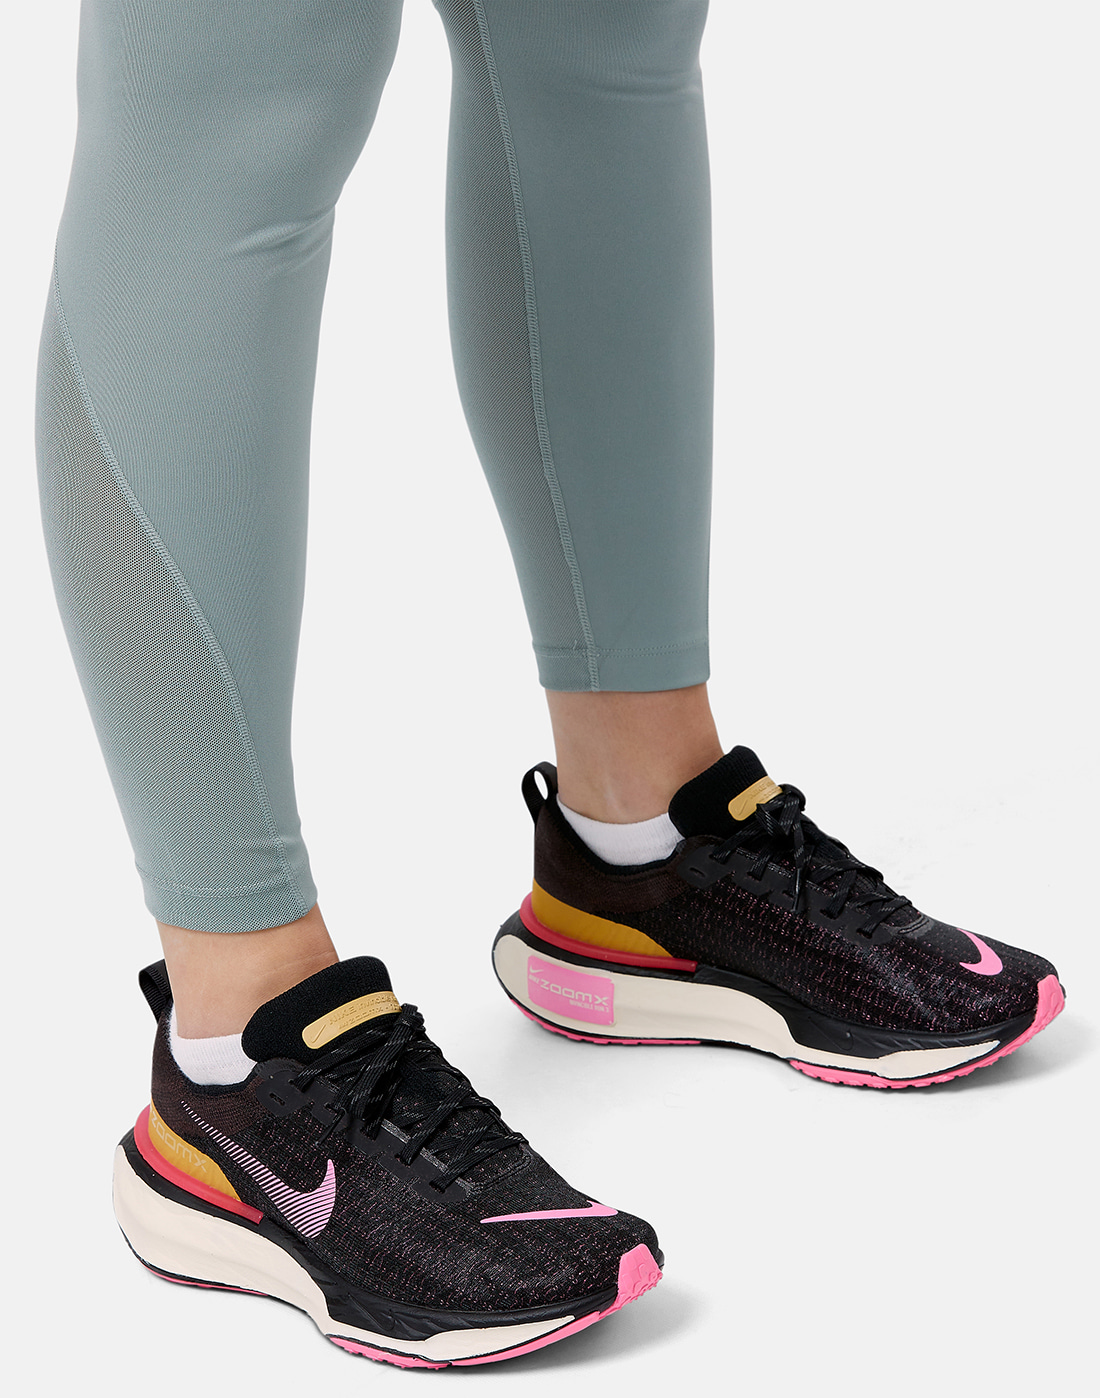 GIÀY THỂ THAO NỮ NIKE WOMENS ZOOMX INVINCIBLE RUN FLYKNIT 3 DR2660-200 8